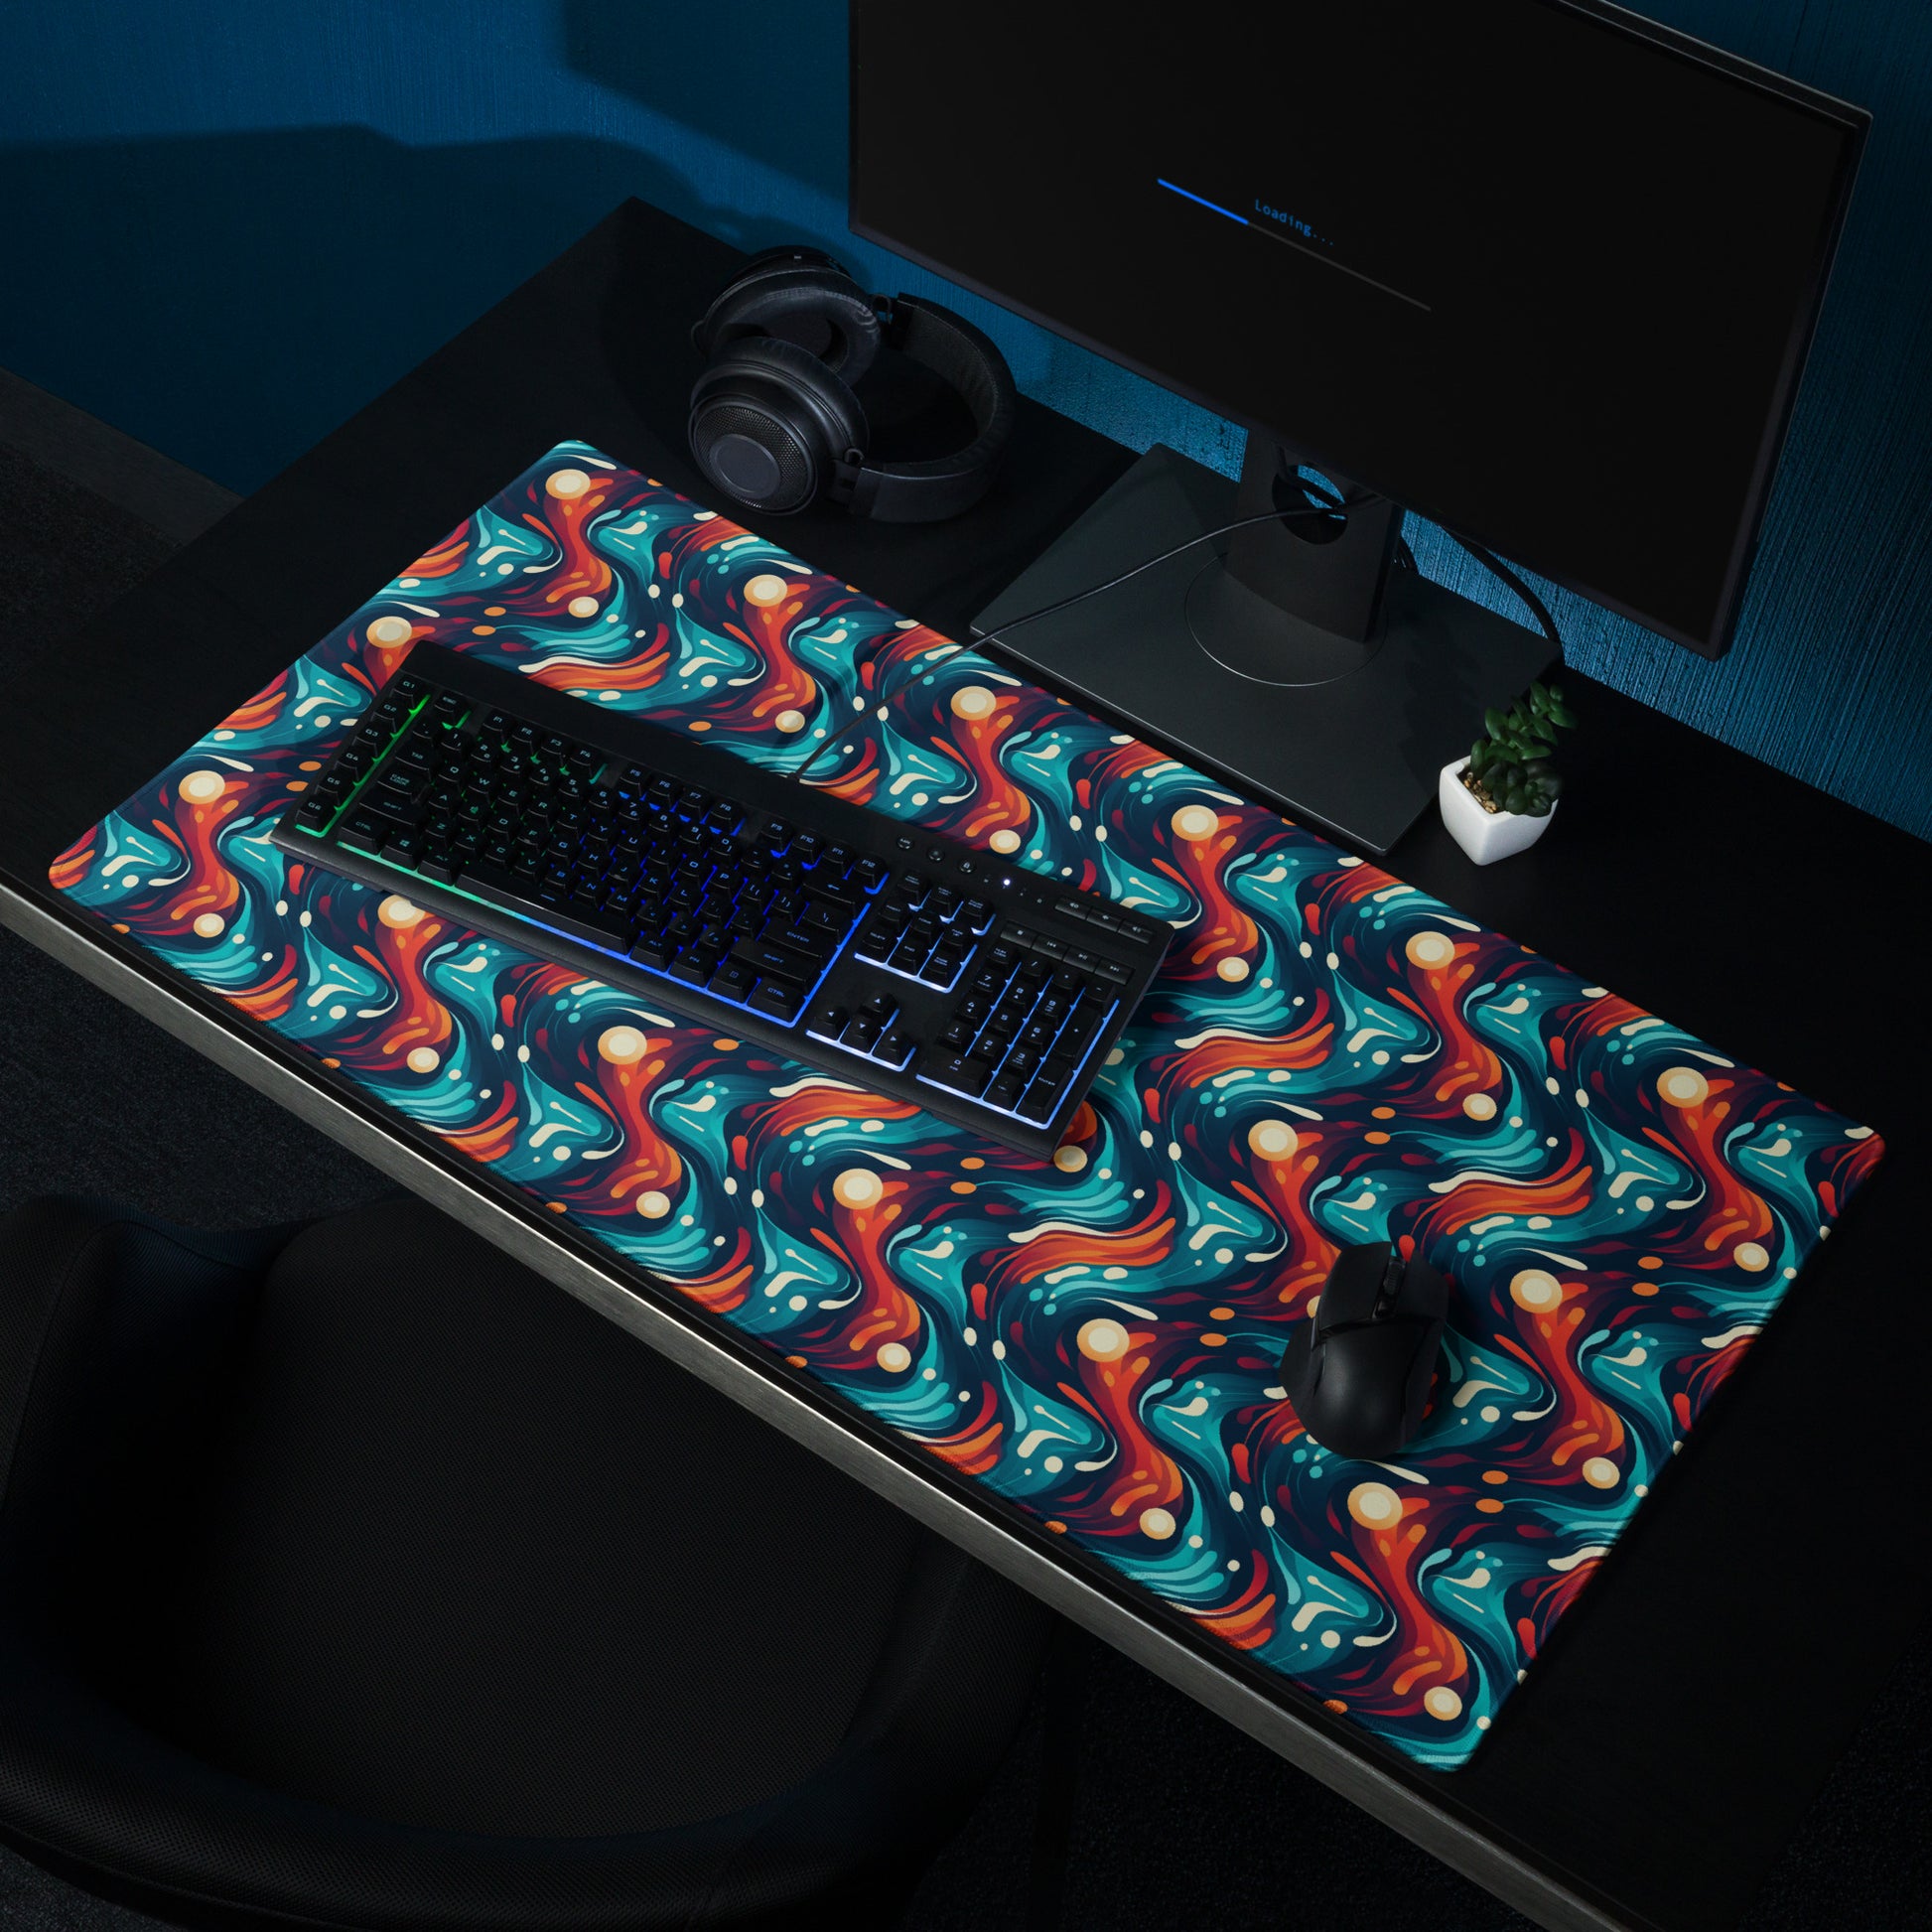 A 36" x 18" desk pad with a blue and orange wavy pattern sitting on a desk.